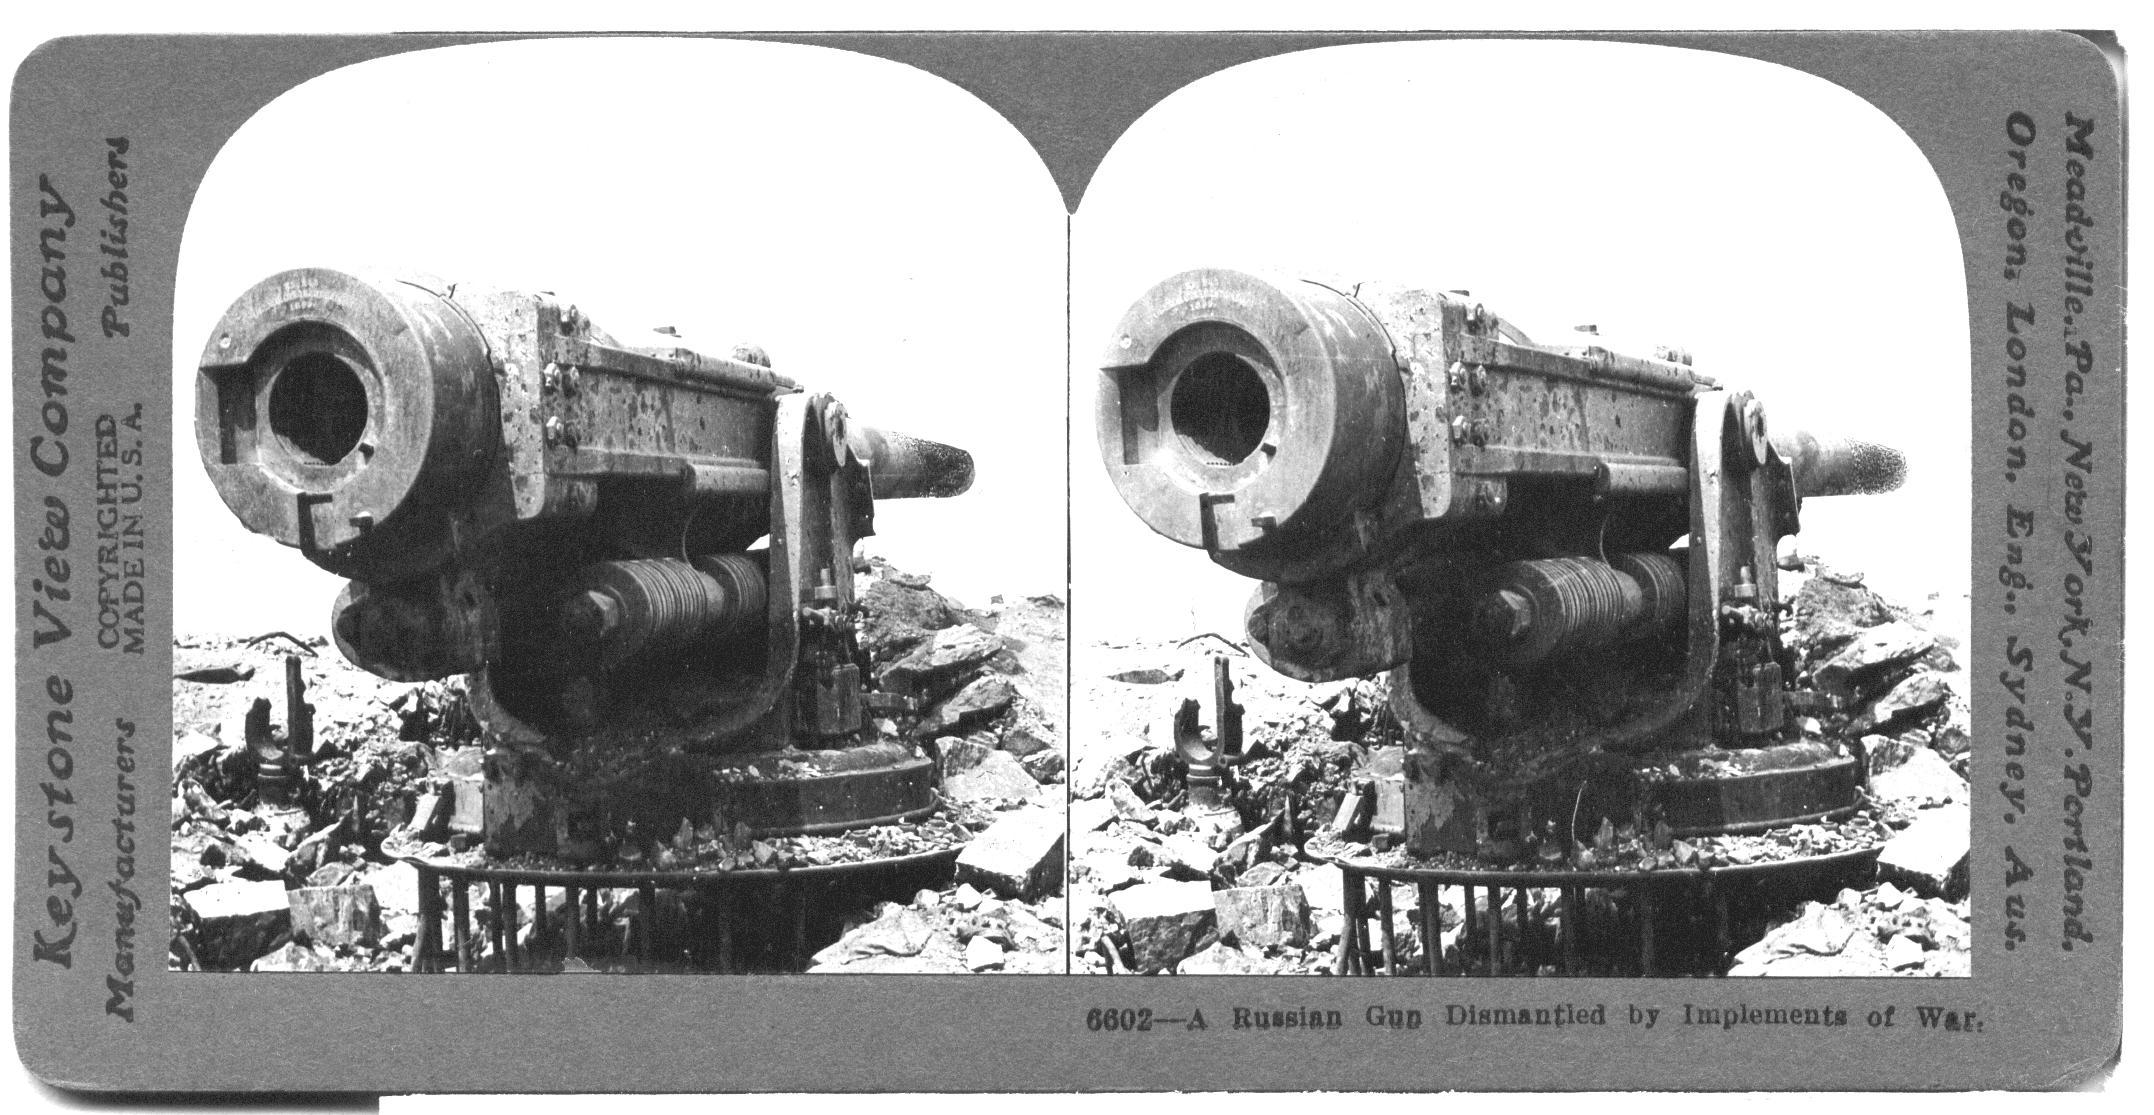 A Russian Gun Dismantled by Implements of War